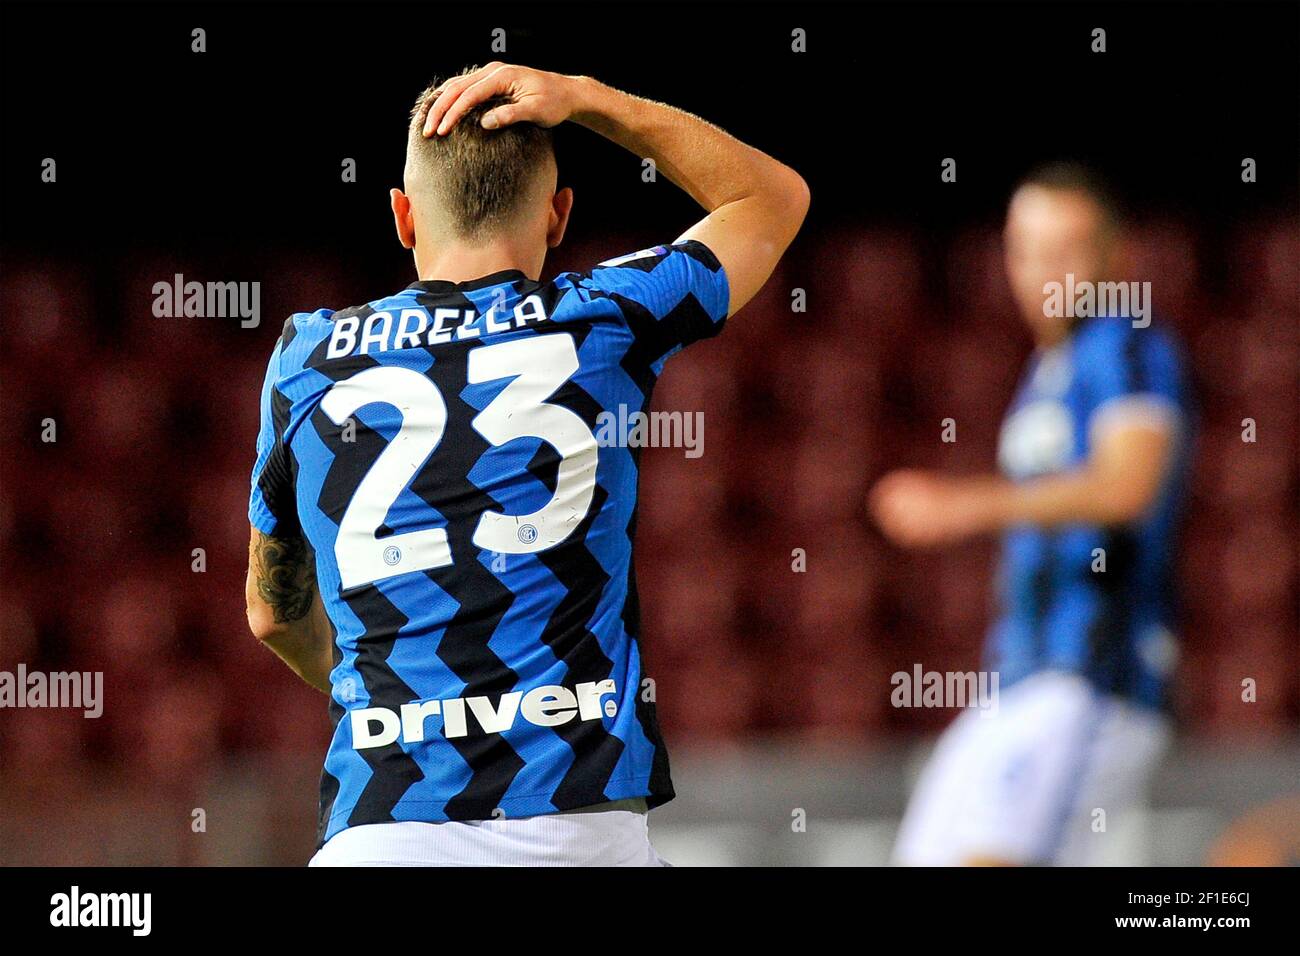 Nicolò Barella player of Inter, during the match of the Italian football league Serie A between Benevento vs Inter final result 2-5, match played at t Stock Photo